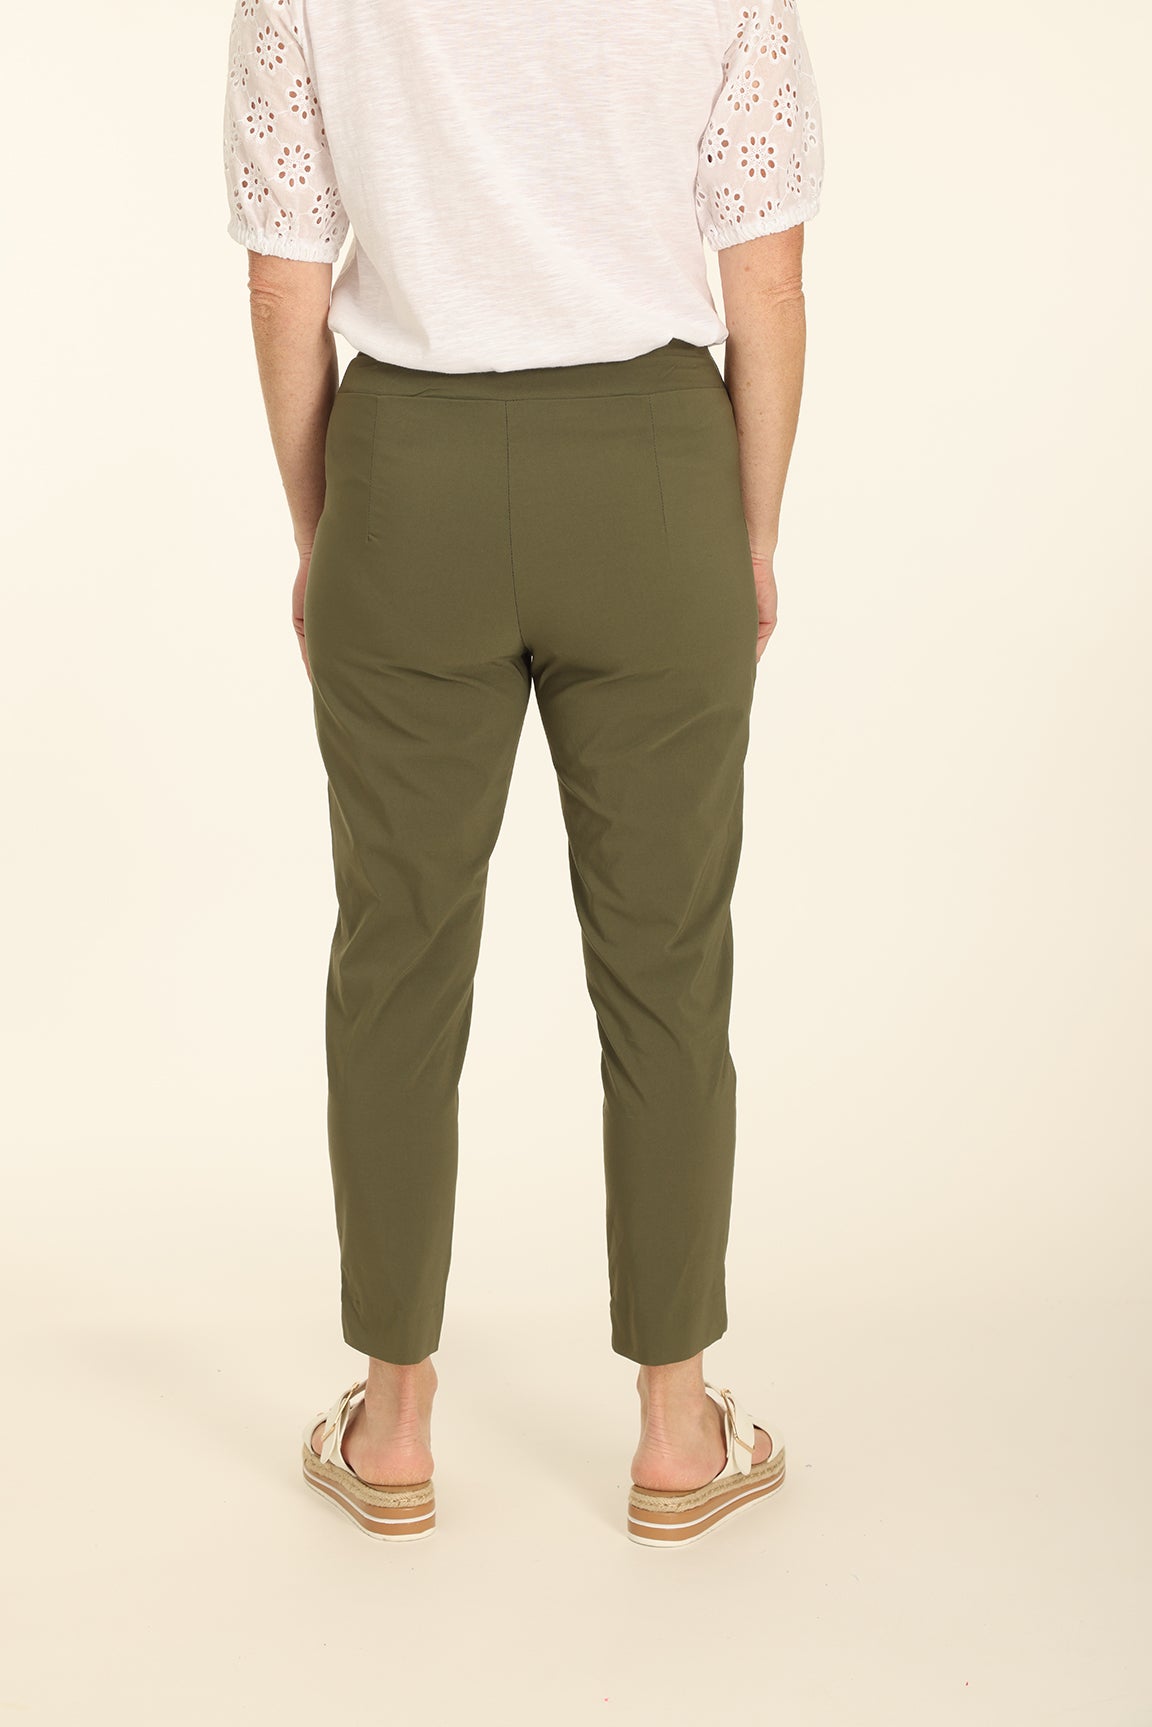 https://www.carolineeve.co.nz/content/products/capri-pant-pull-on-cleo-fit-wide-basque-ewaist-il-64cm-olive-4-2147yy.jpg